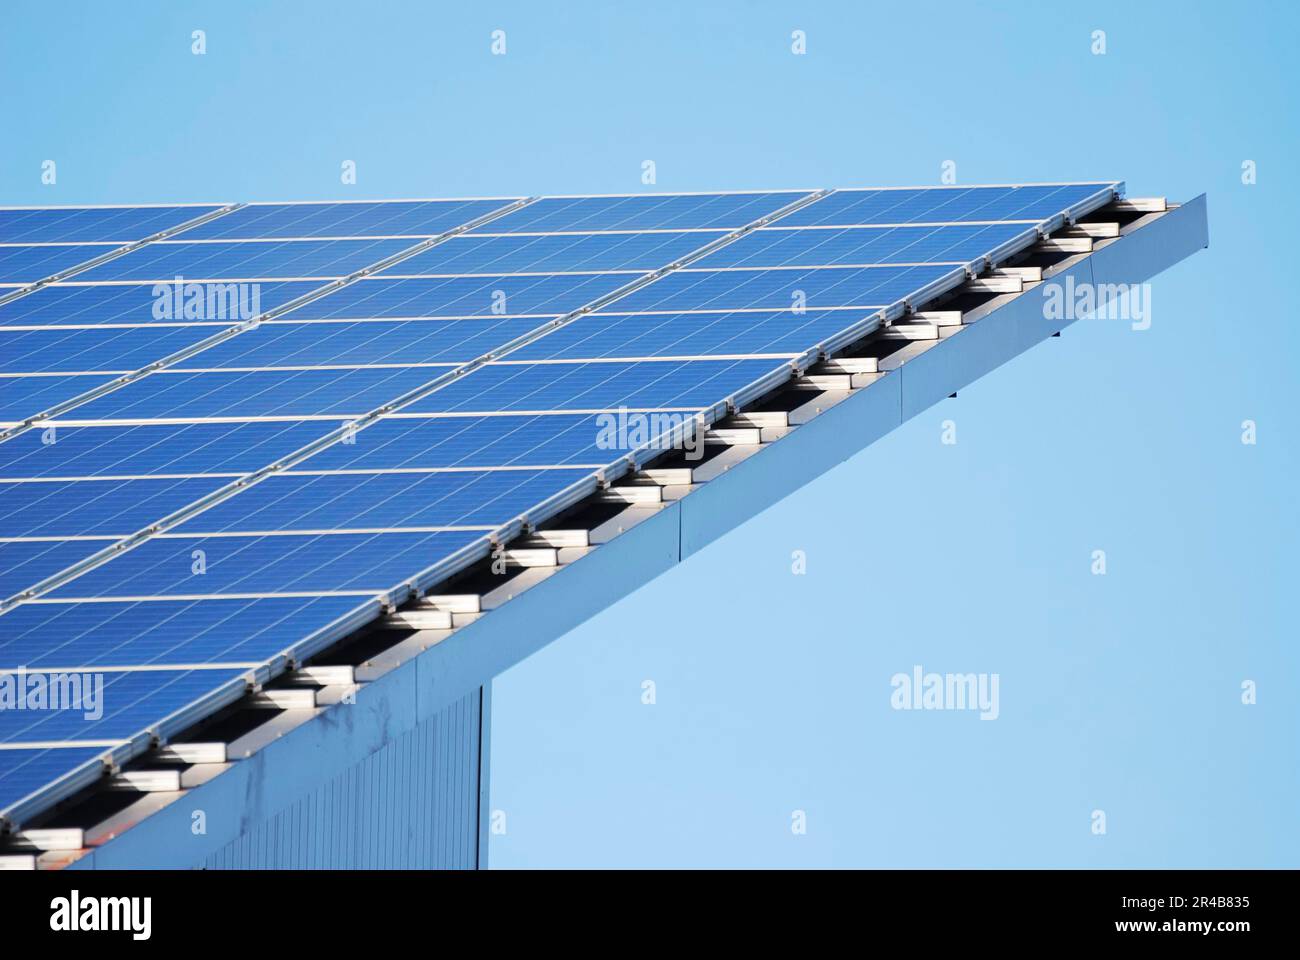 Photovoltaic, Electricity generation with solar panels on the roof Stock Photo